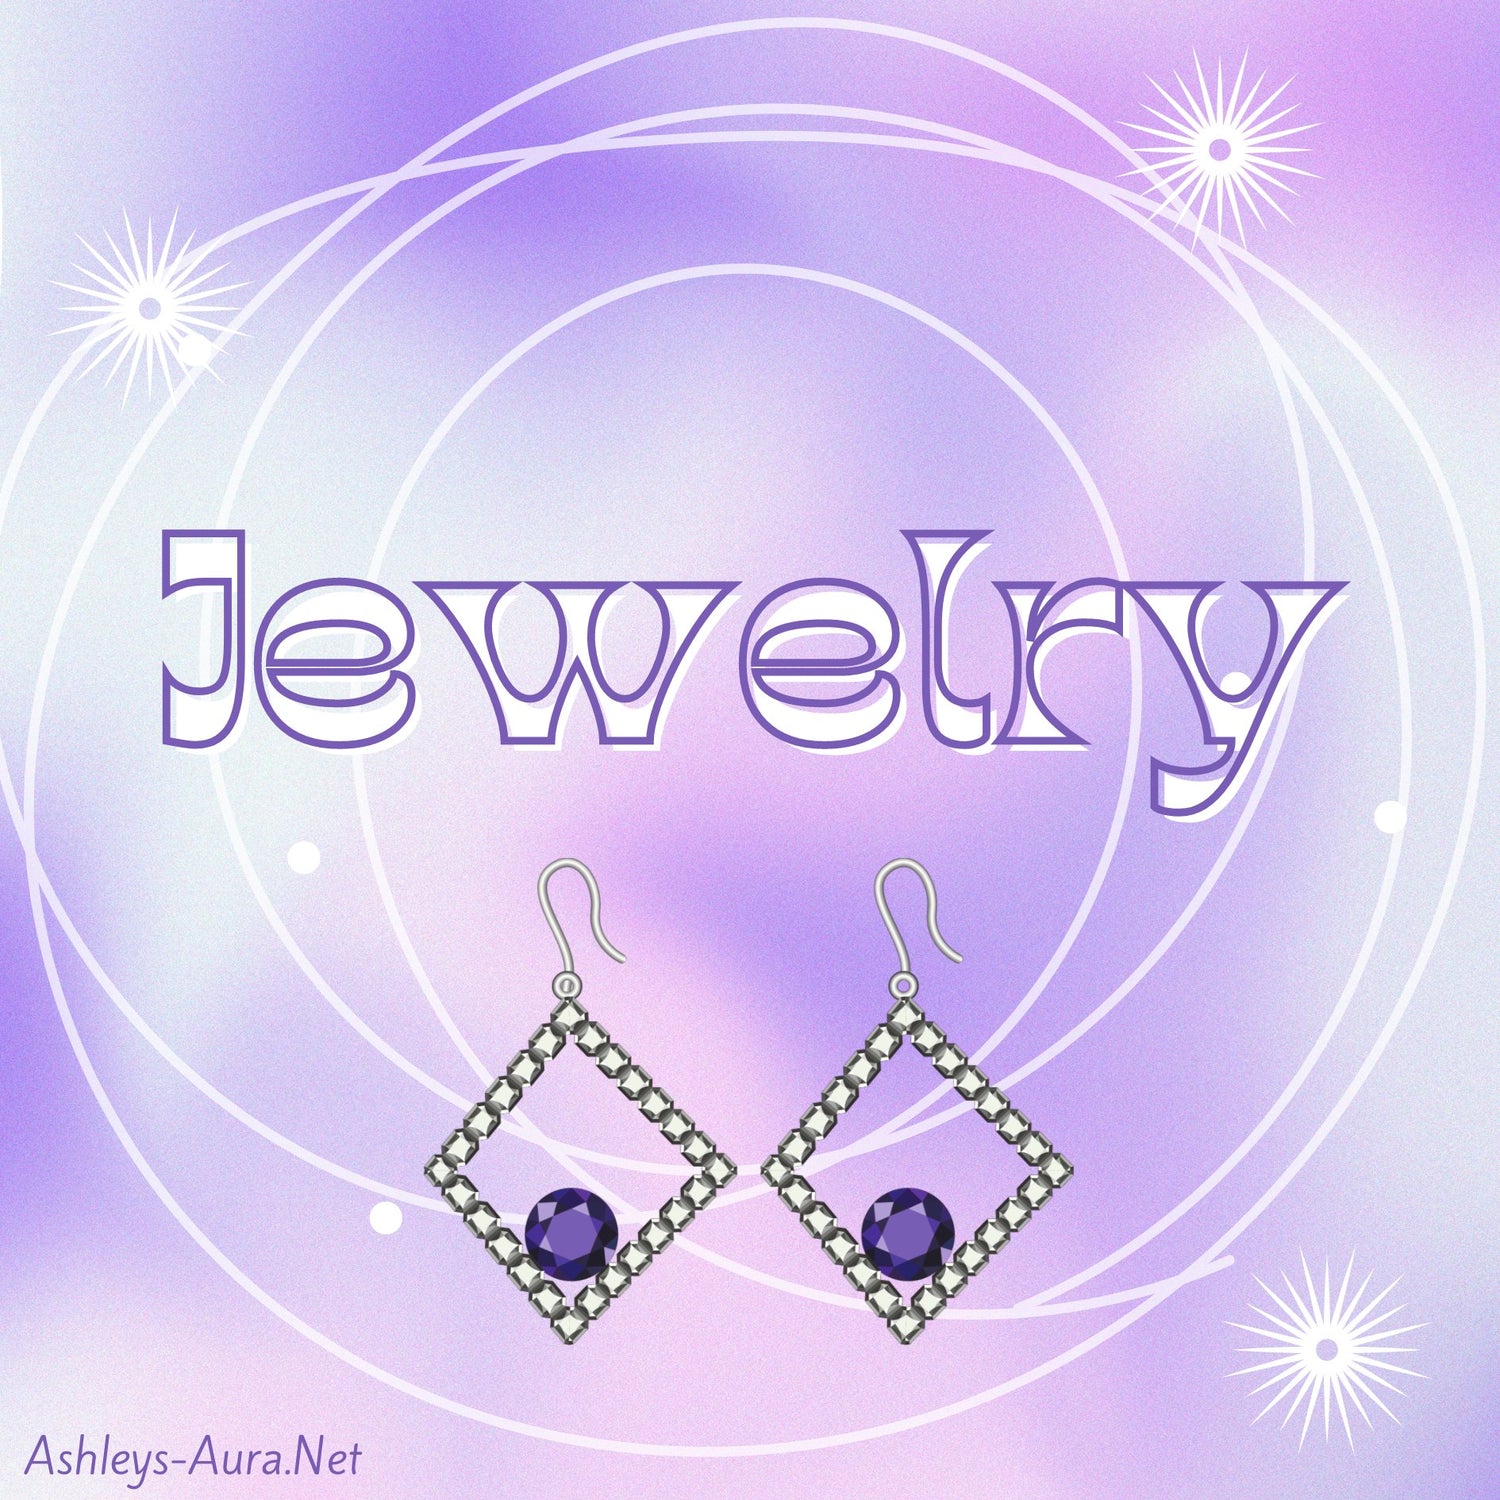 Jewelry Collection - Ashley's Aura